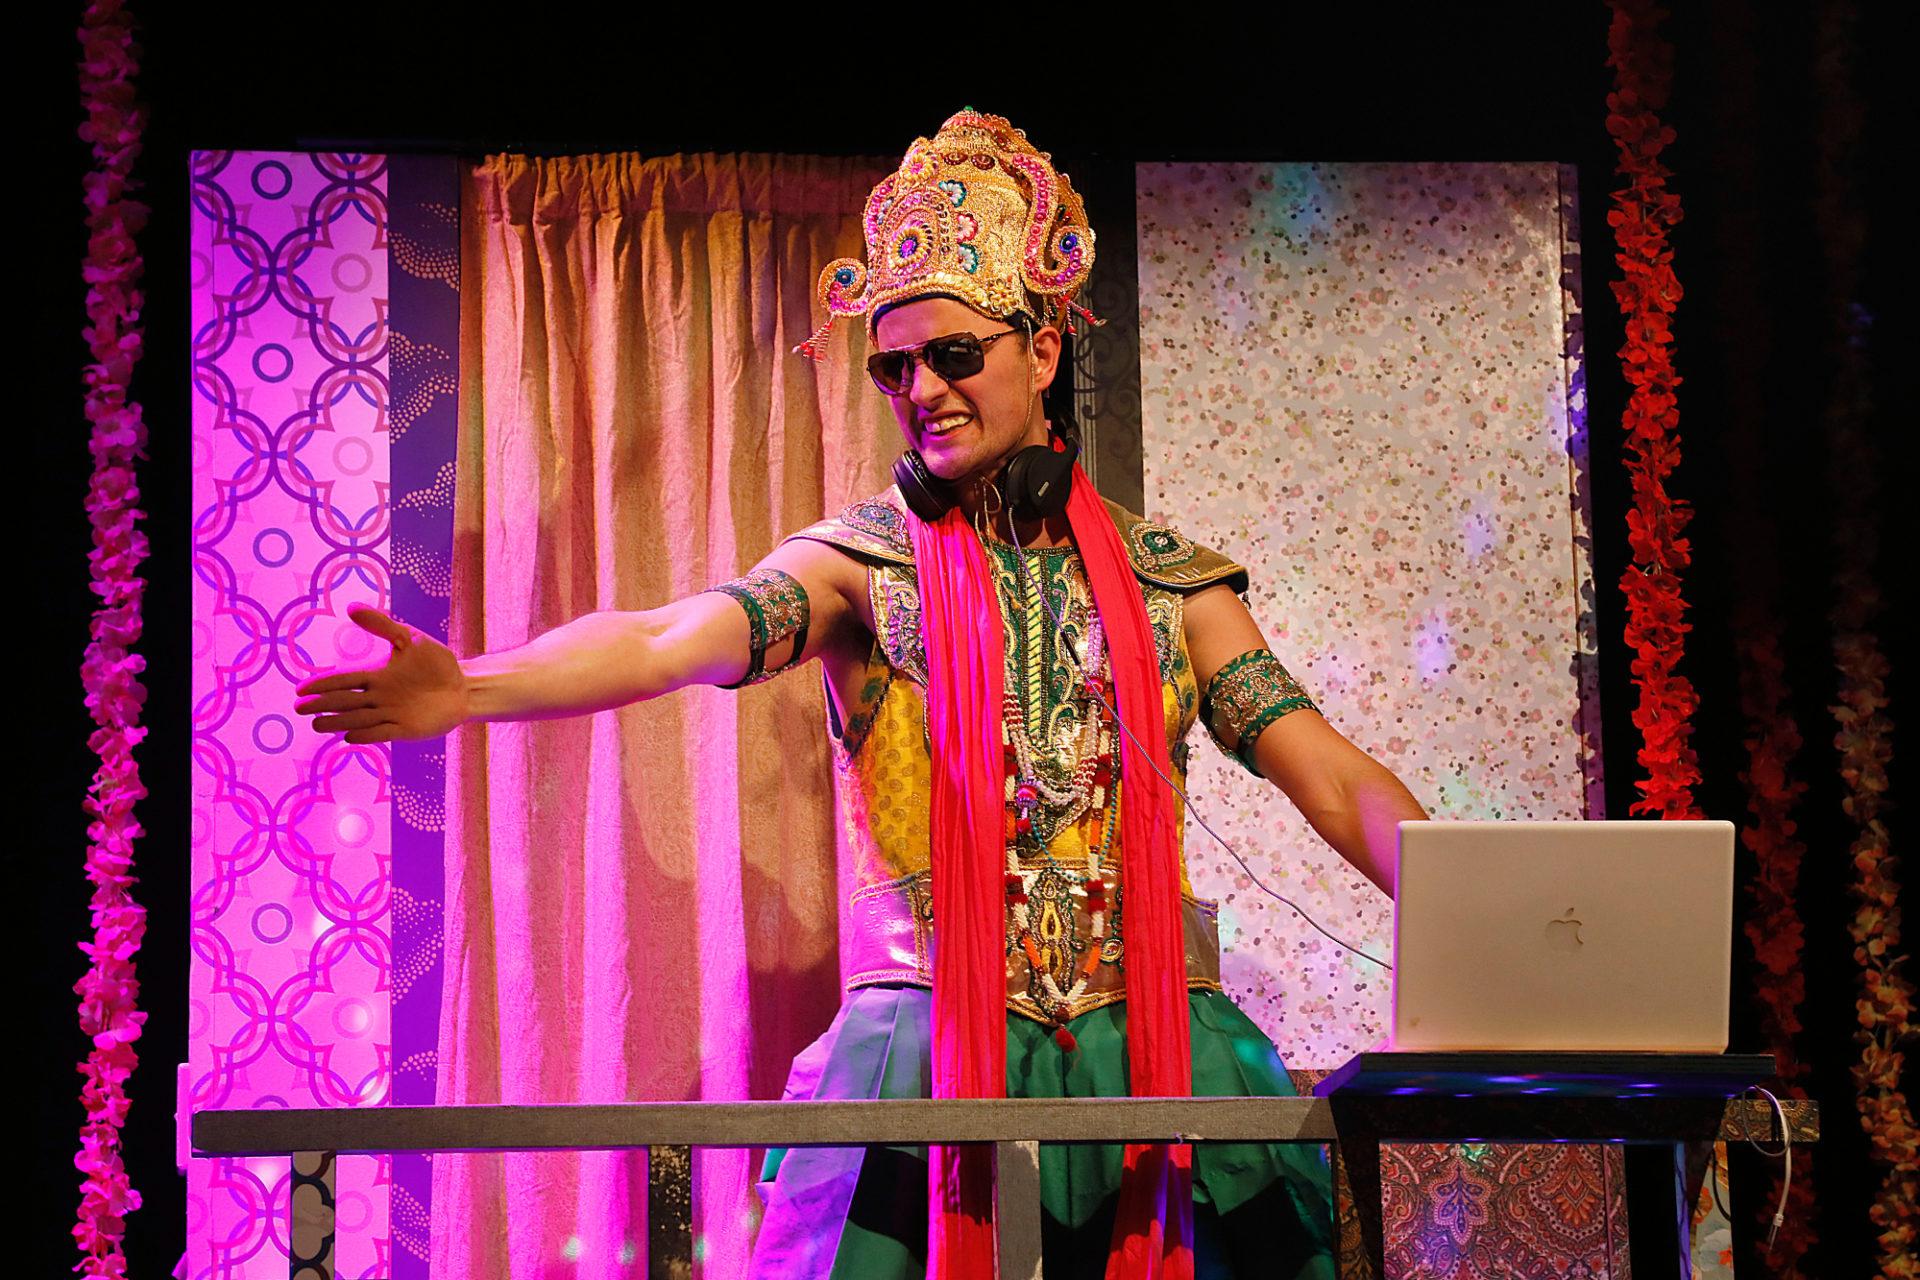 An Indian man in festival / ceremonial dress is standing behind table with a laptop on it. He is wearing sunglasses and extending one hand as if in excitement. The backdrop is colorful from the lighting design, with different fabrics serving as curtains.